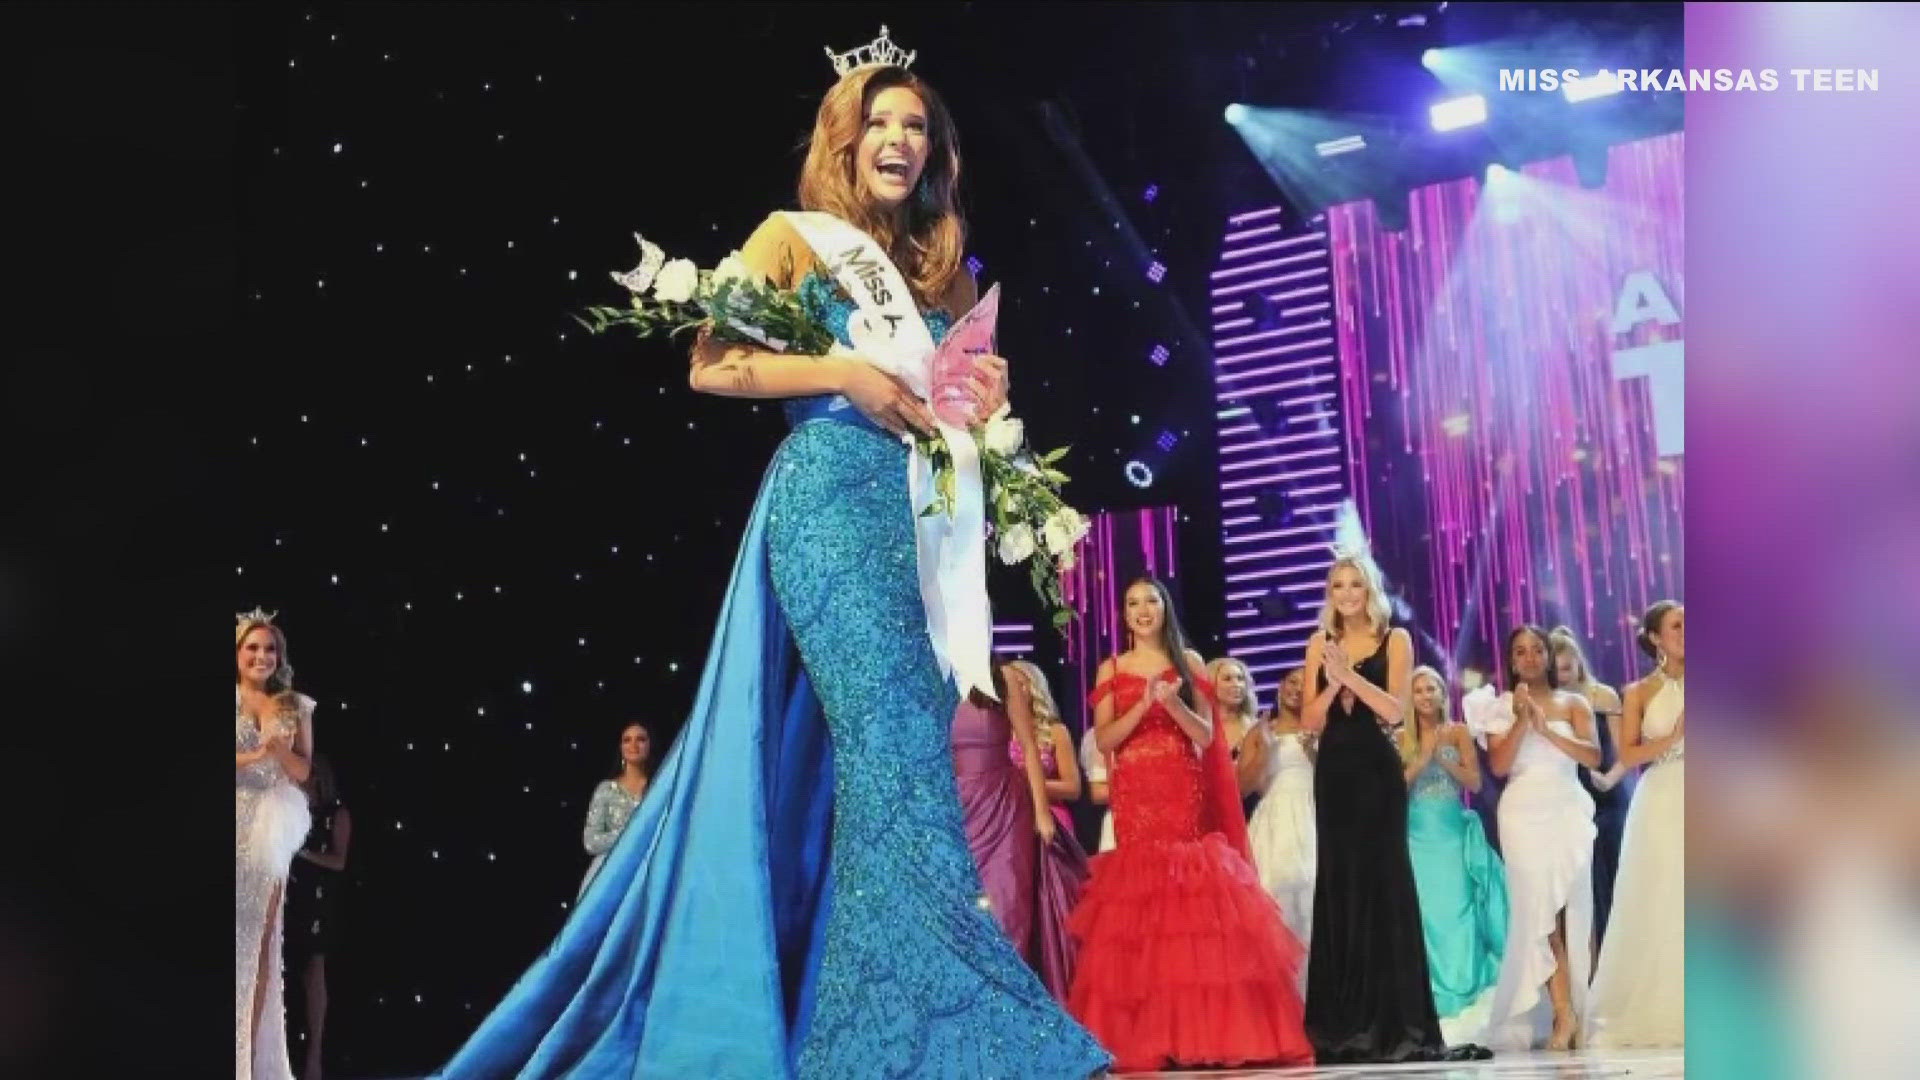 As the new Miss Arkansas Teen, Peyton Bolling will represent the state at the 2024 Miss America's Teen Pageant in Orlando.